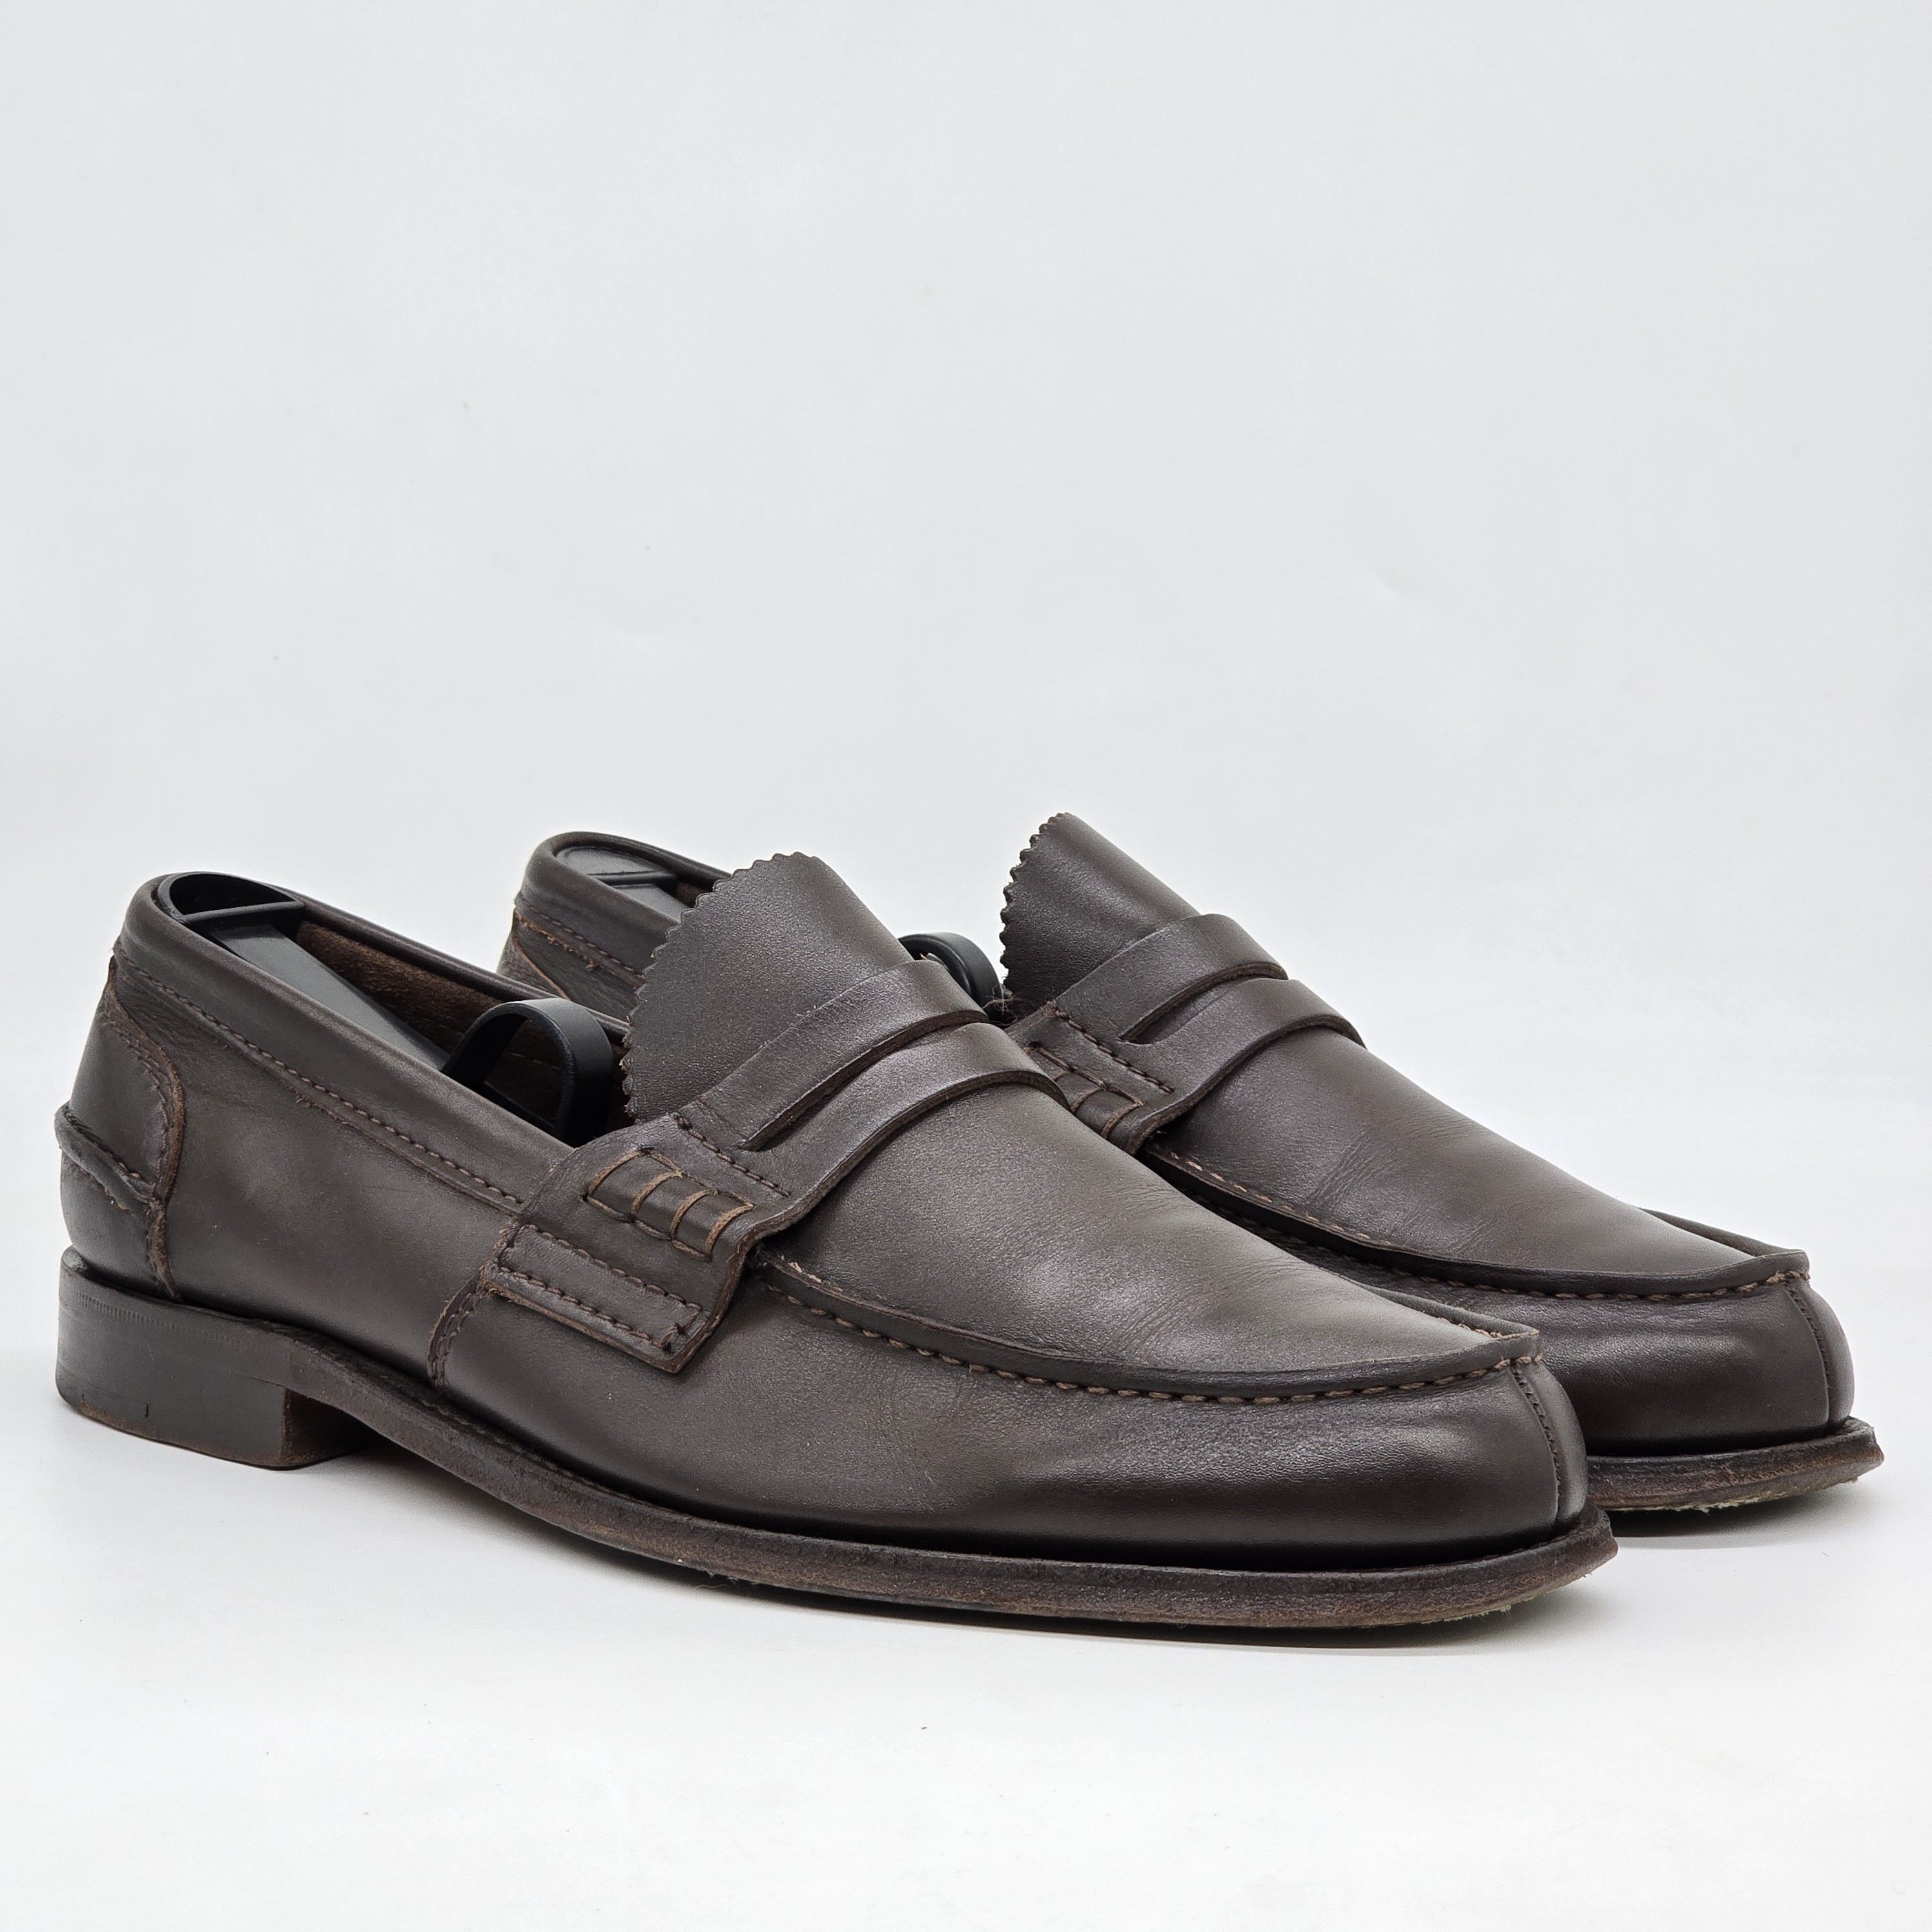 Churchs - Pembrey Leather Loafers - 1